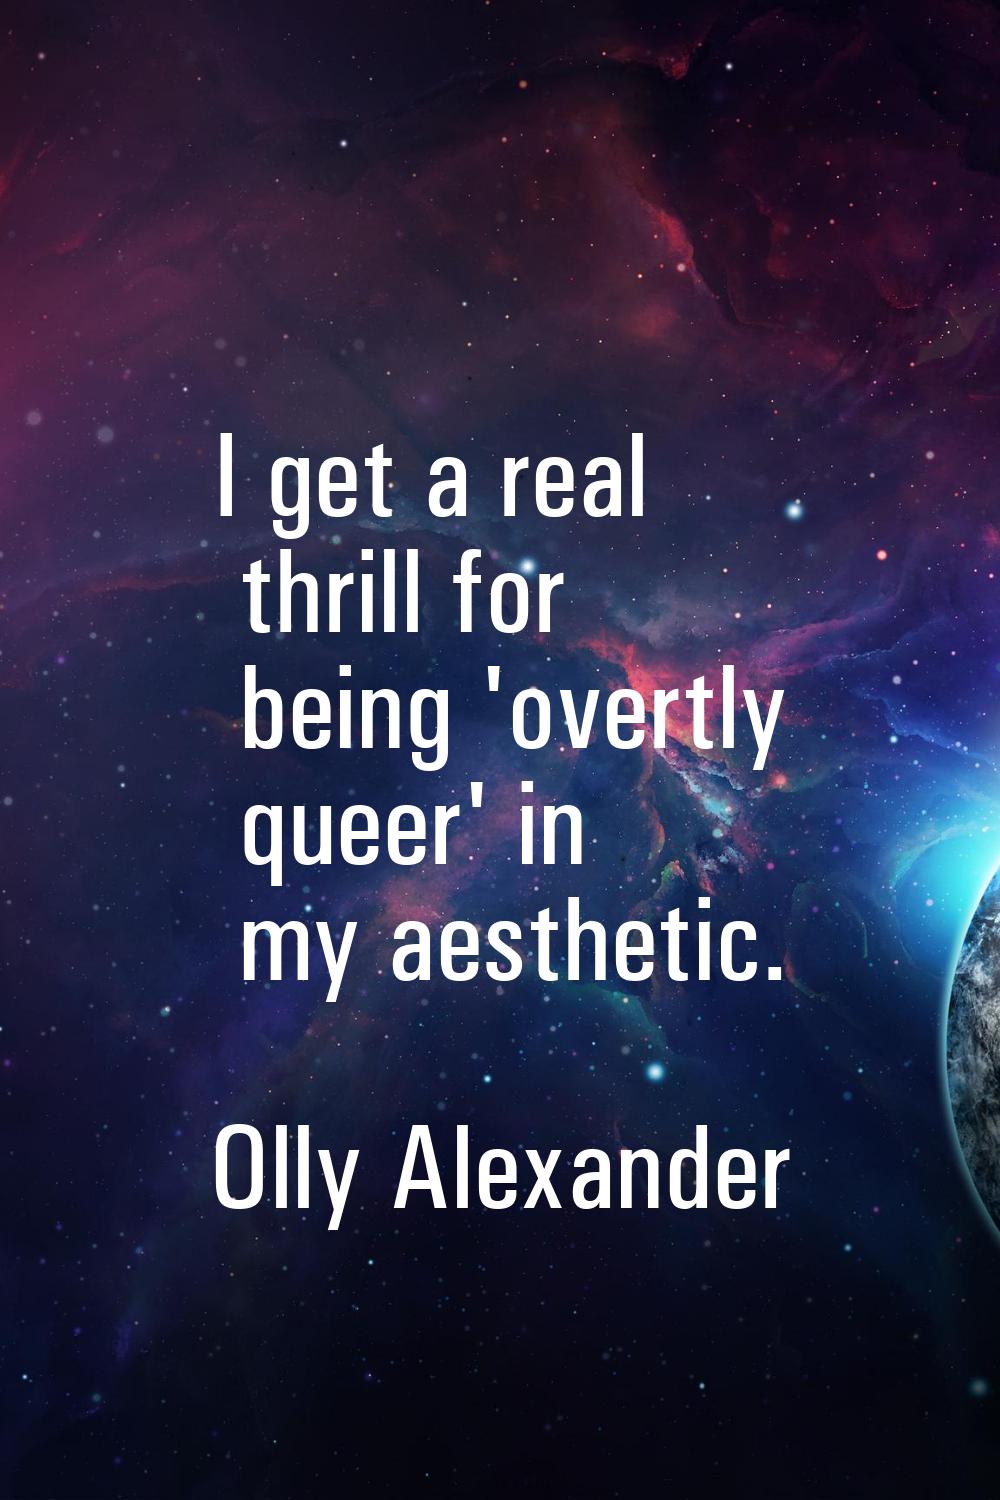 I get a real thrill for being 'overtly queer' in my aesthetic.